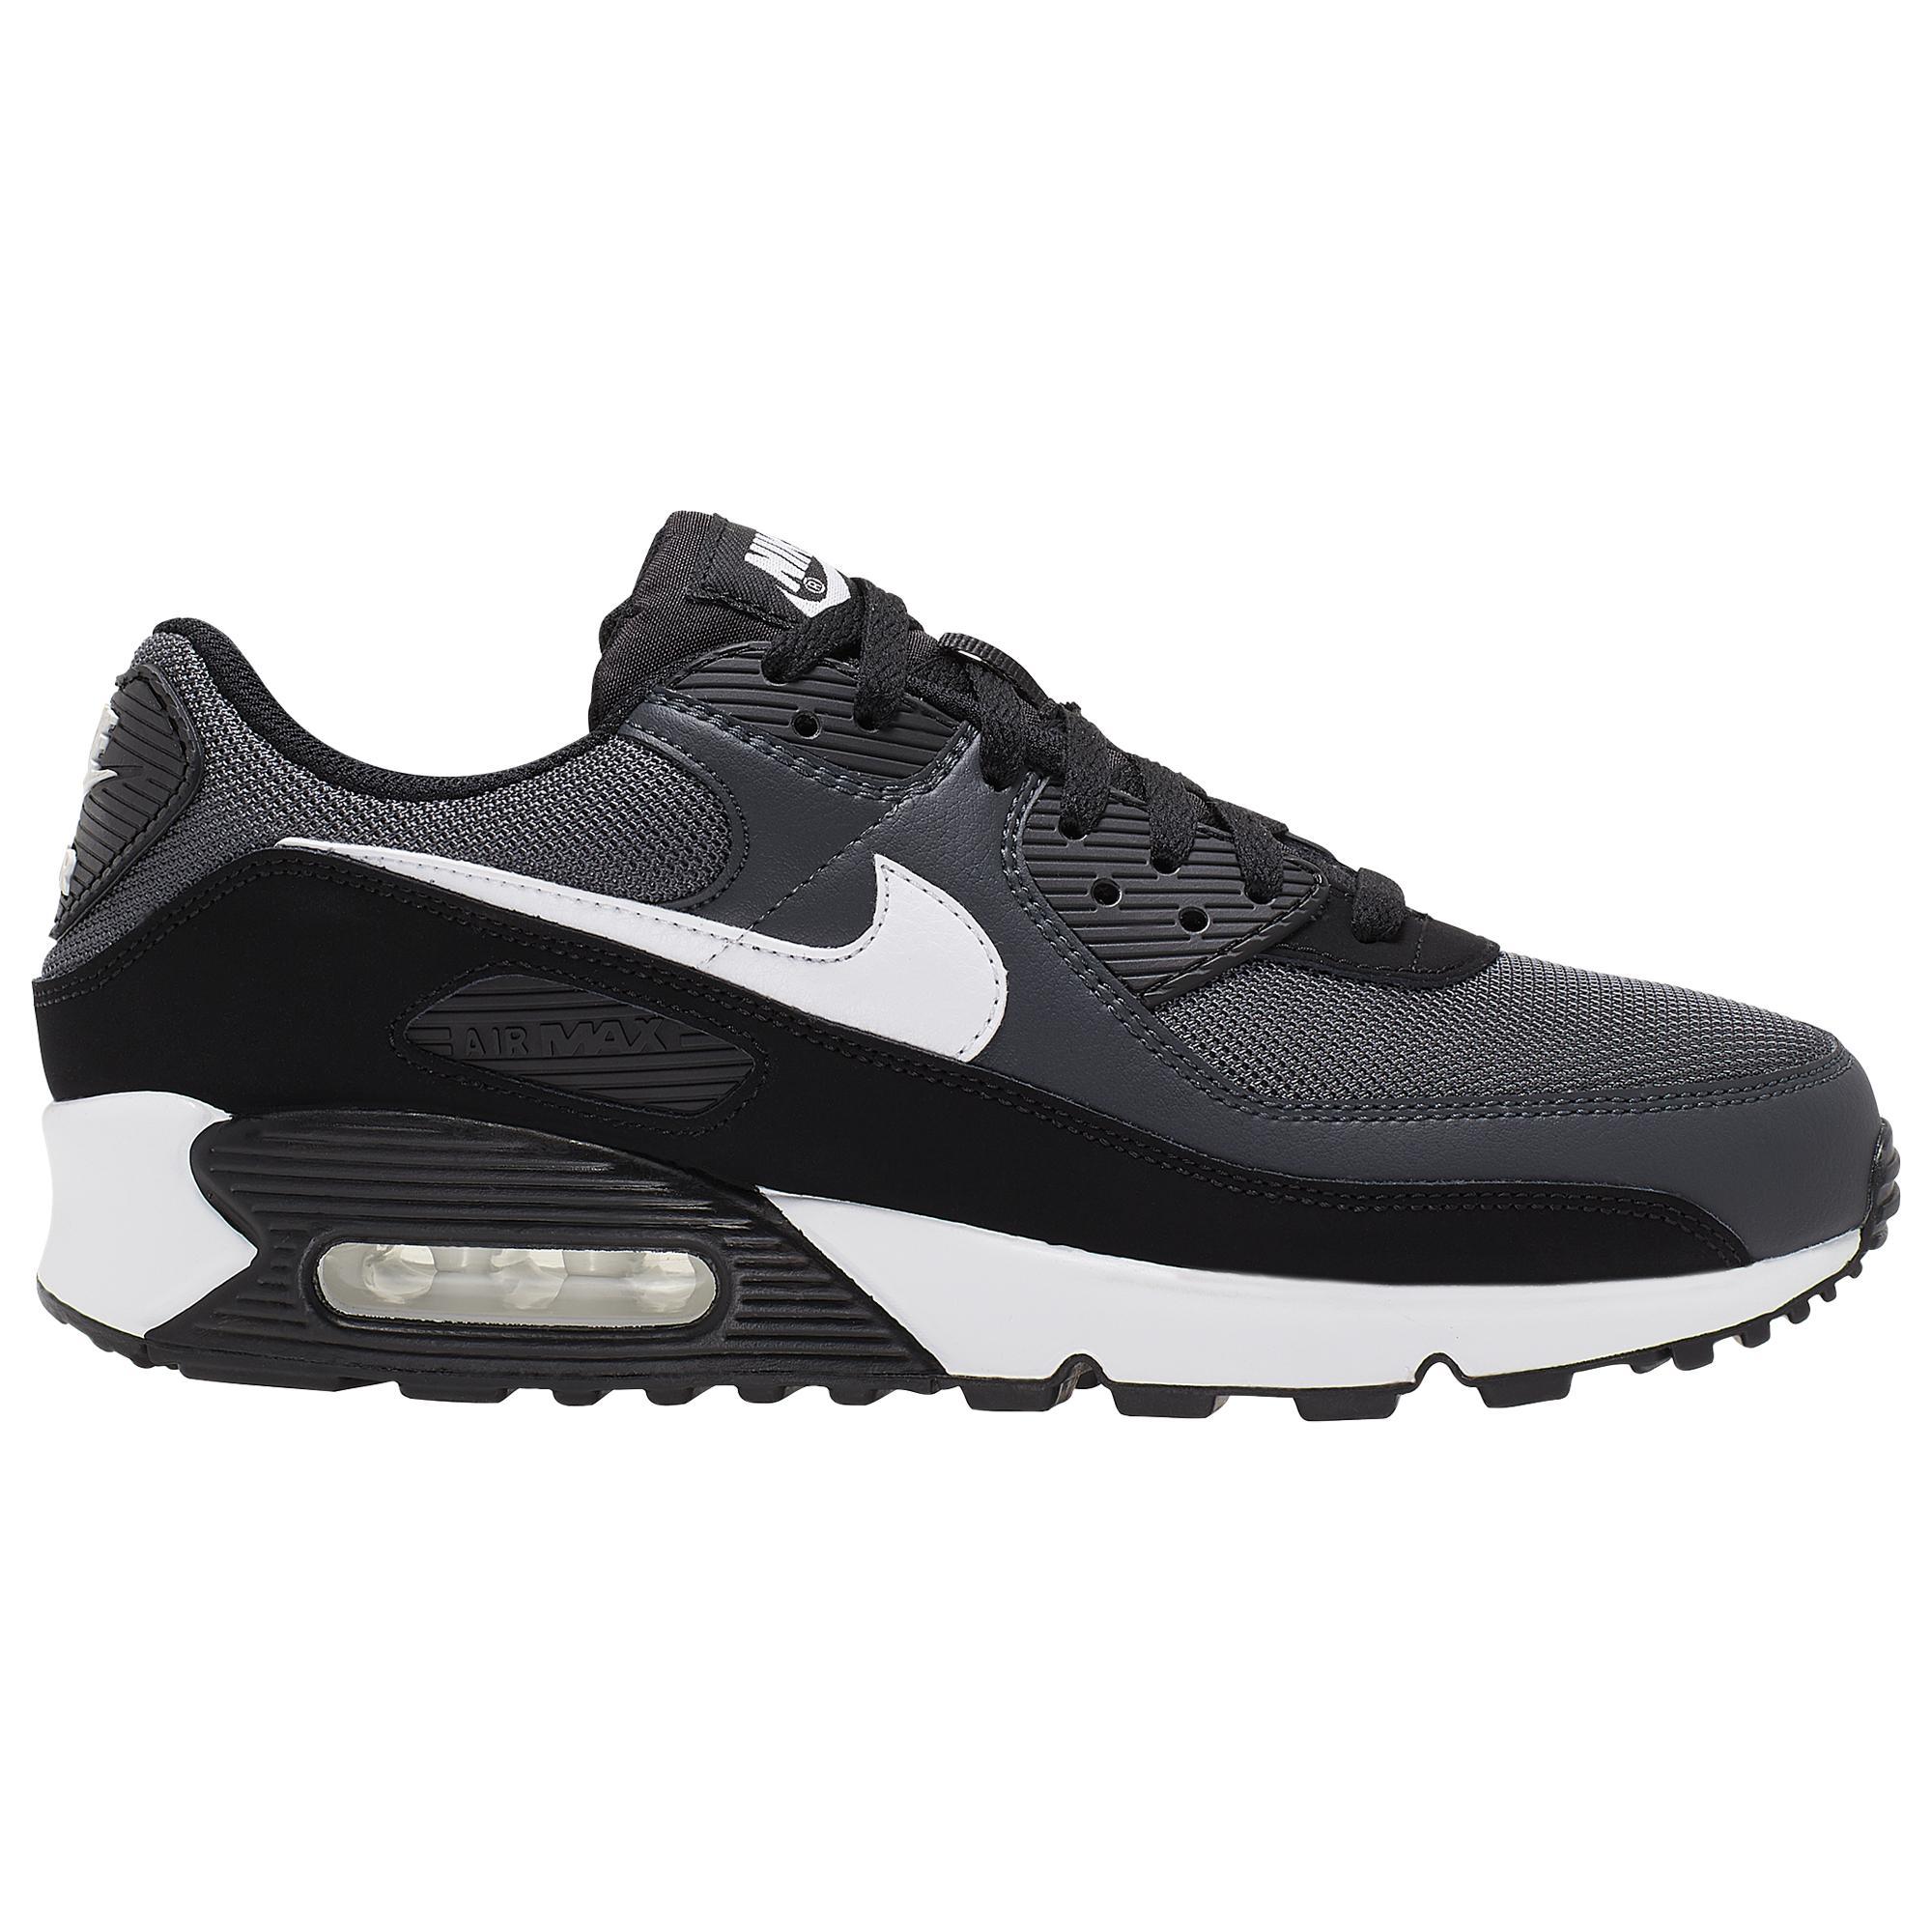 Nike Leather Air Max 90 Shoes in Iron Grey/White/Dark Smoke Grey/ (Gray)  for Men - Save 22% - Lyst